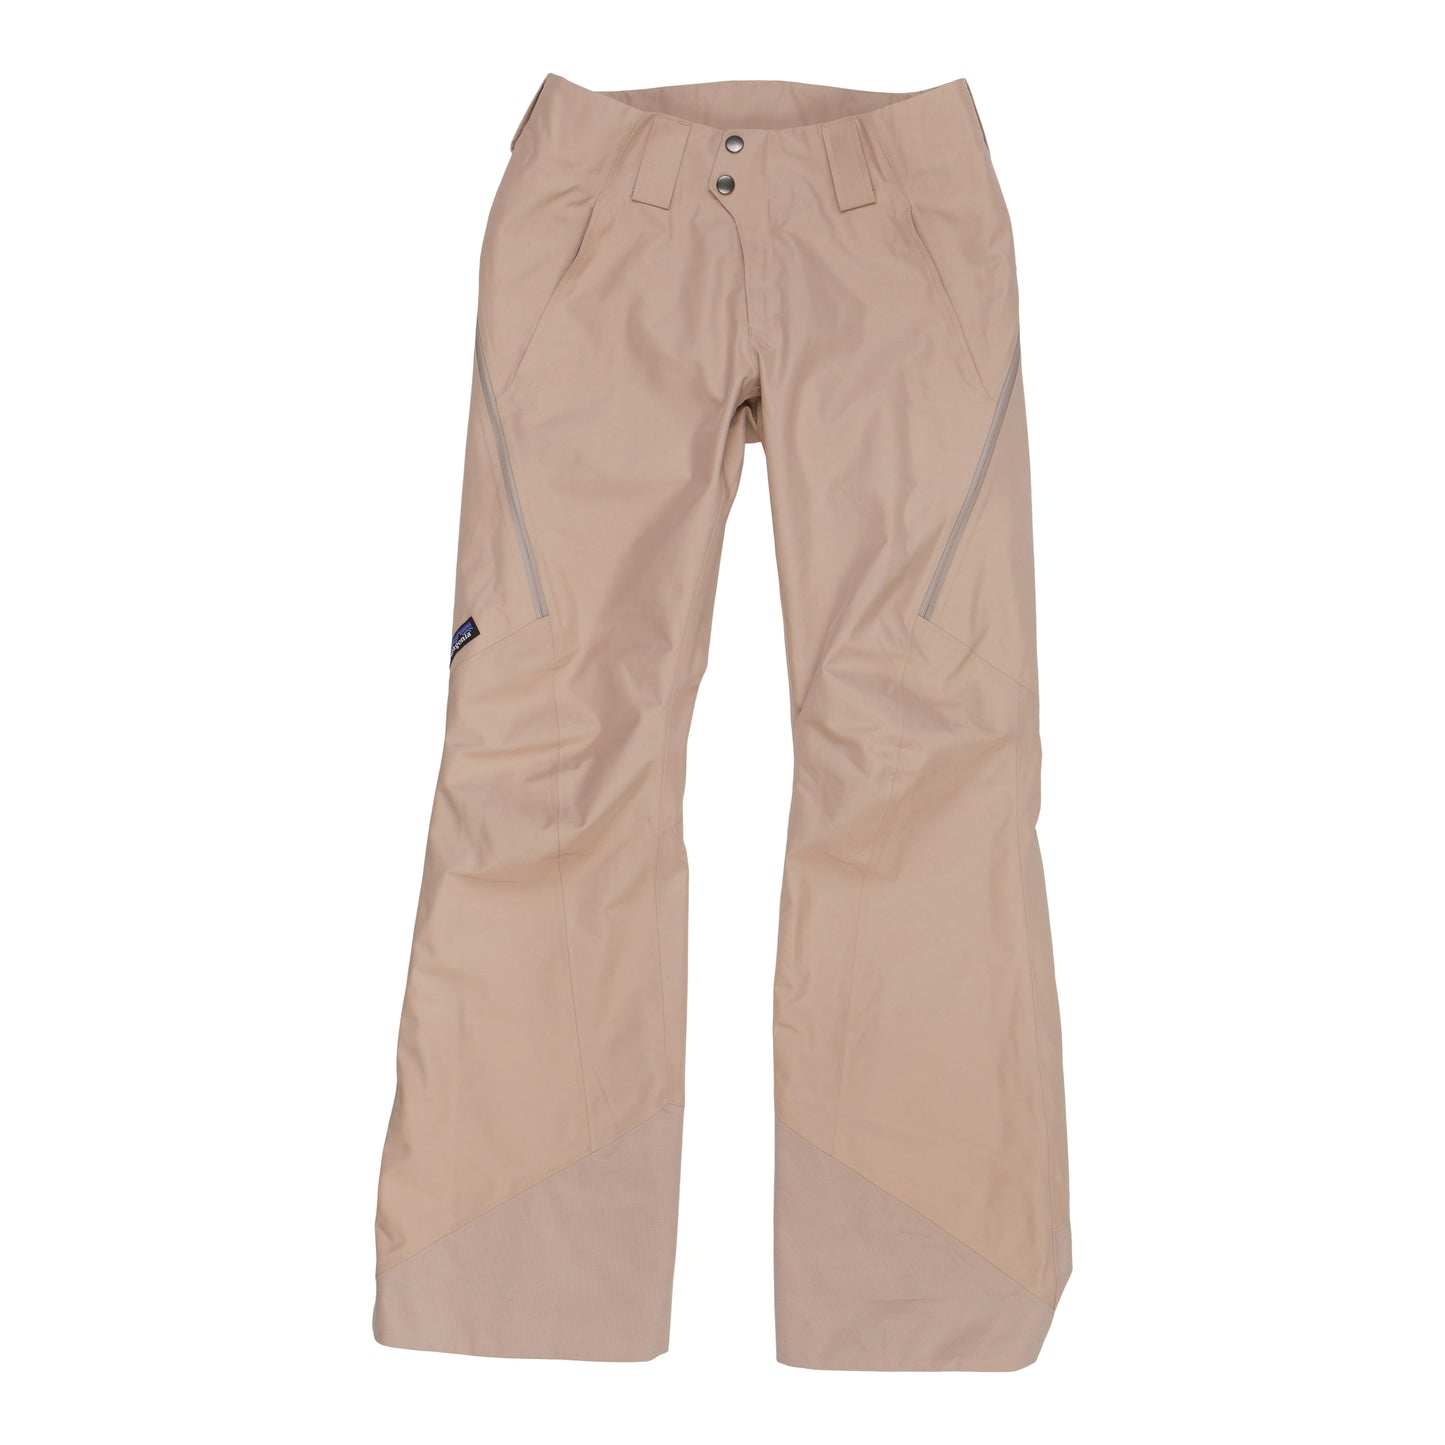 W's Insulated Powder Bowl Pants